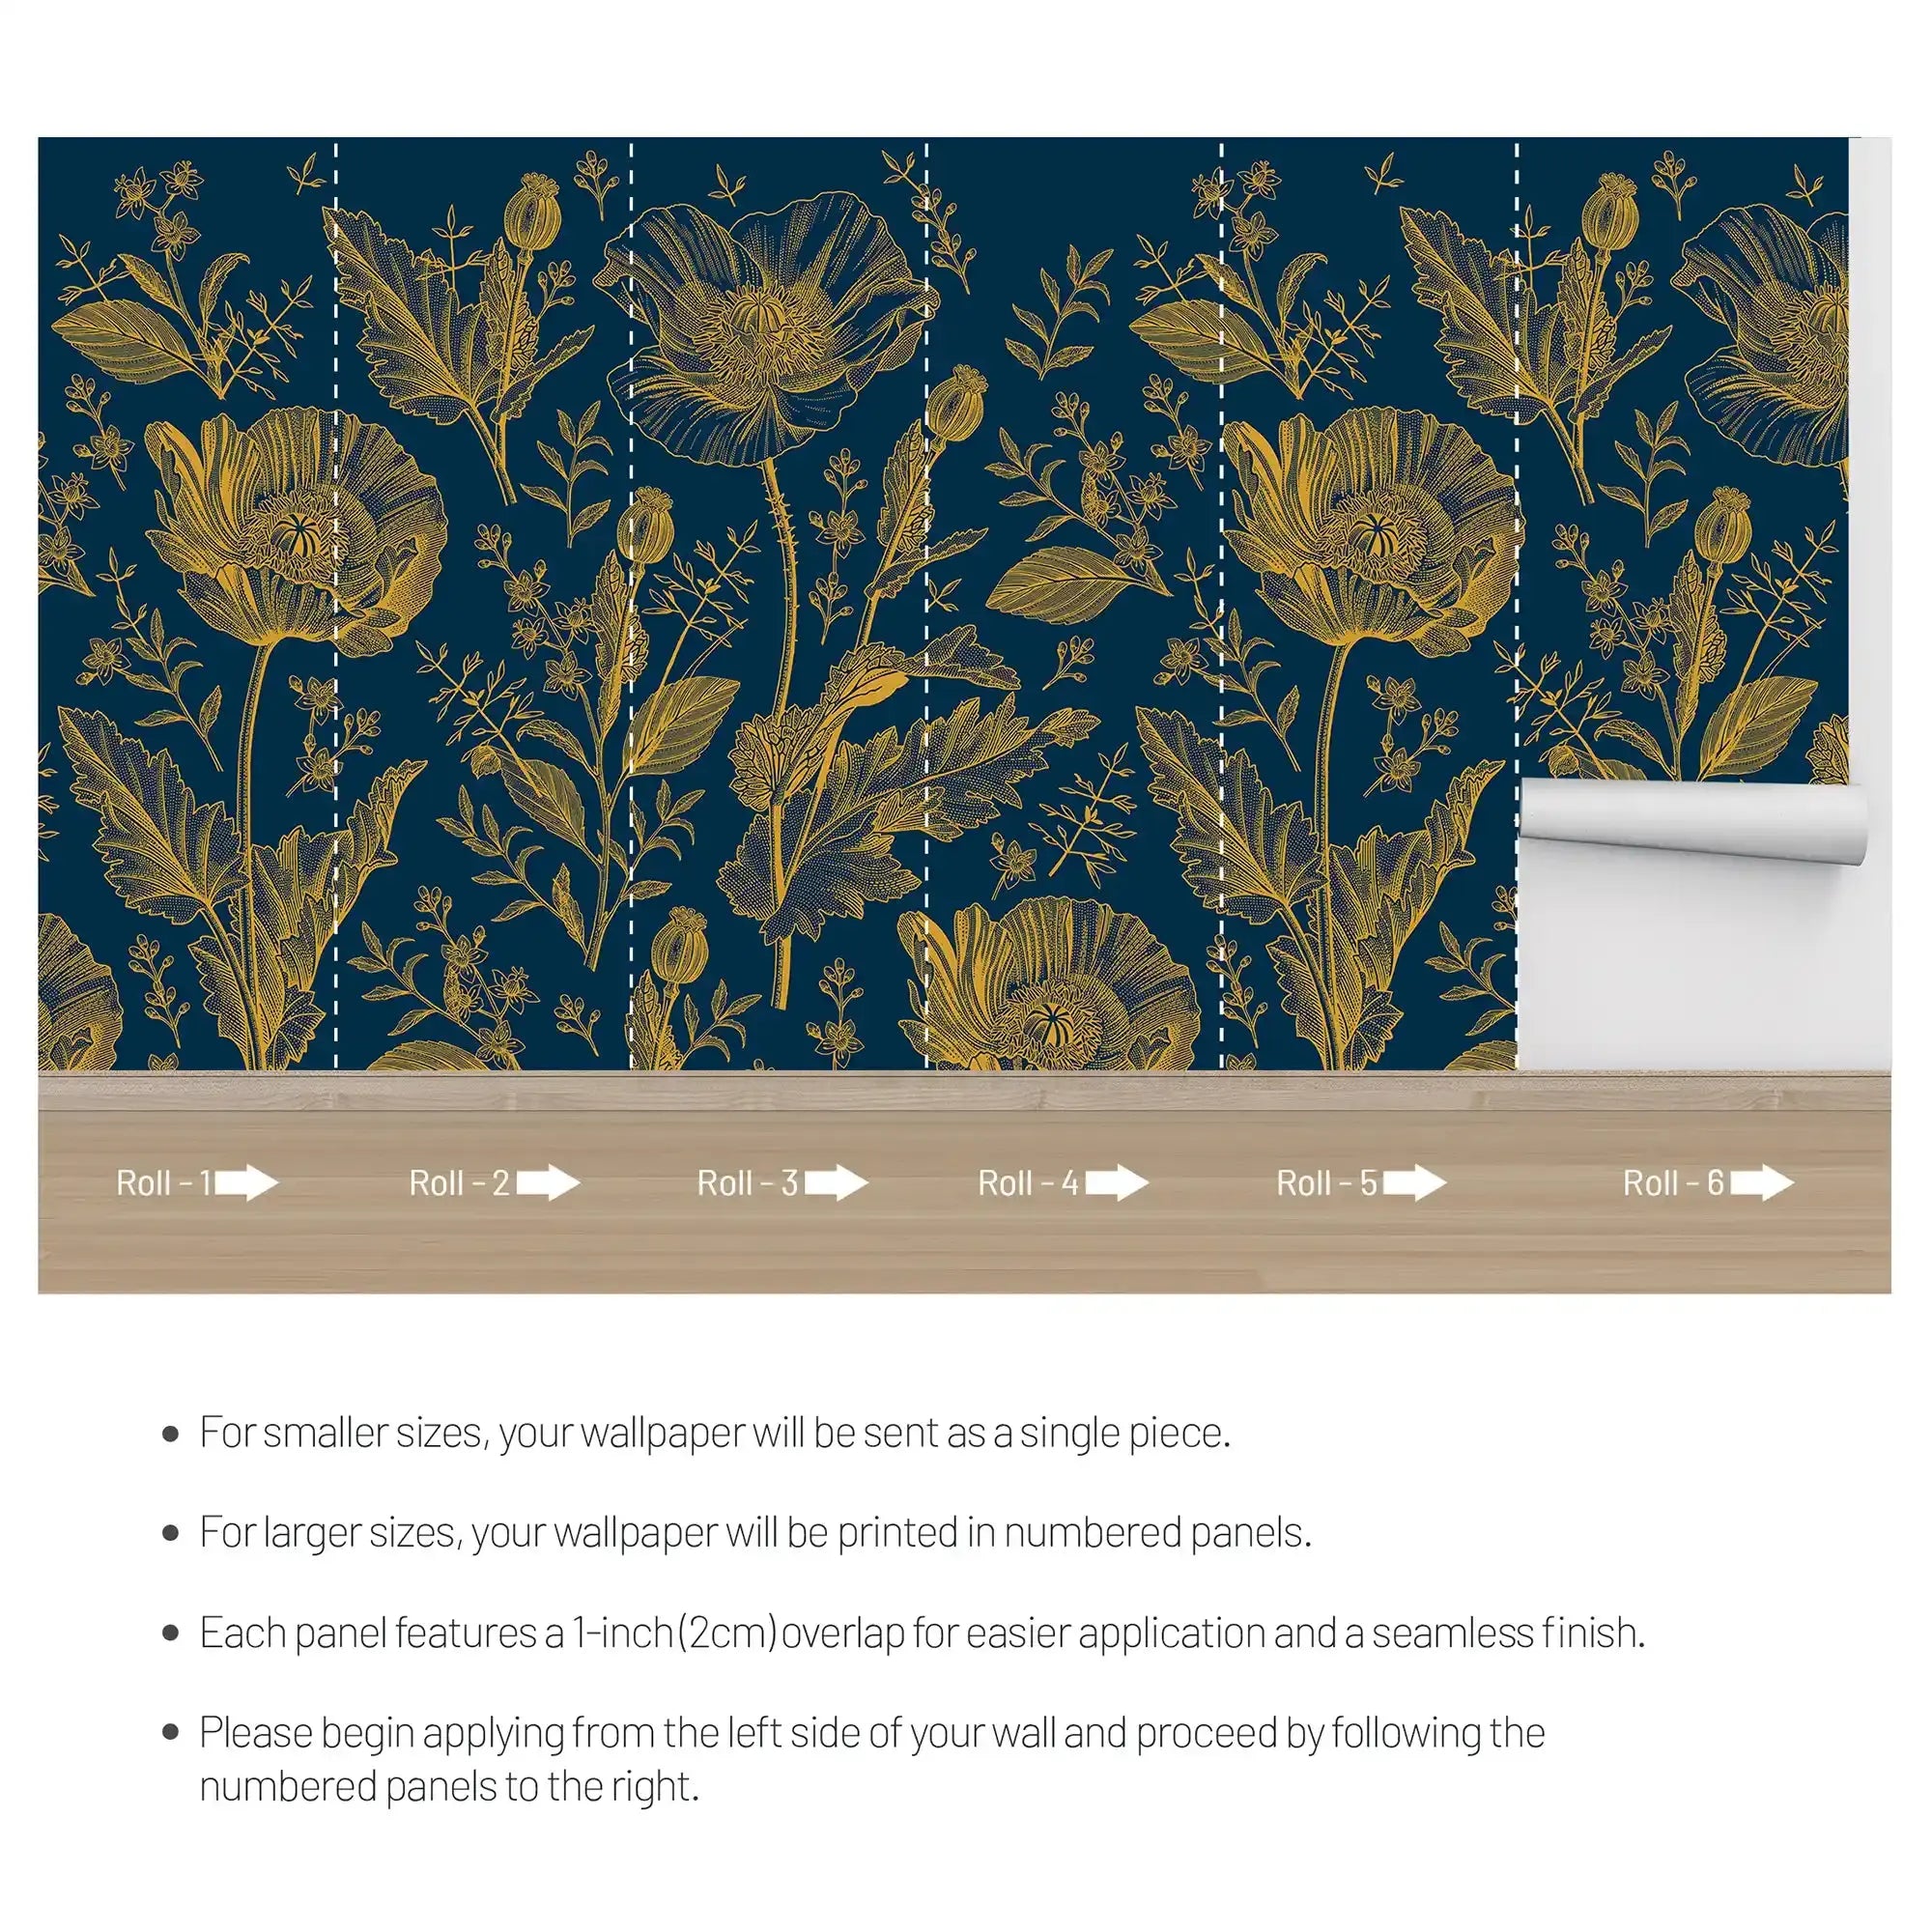 3093-D / Floral Wall Mural: Self Adhesive, Removable Wallpaper for Modern and Boho Decor - Artevella